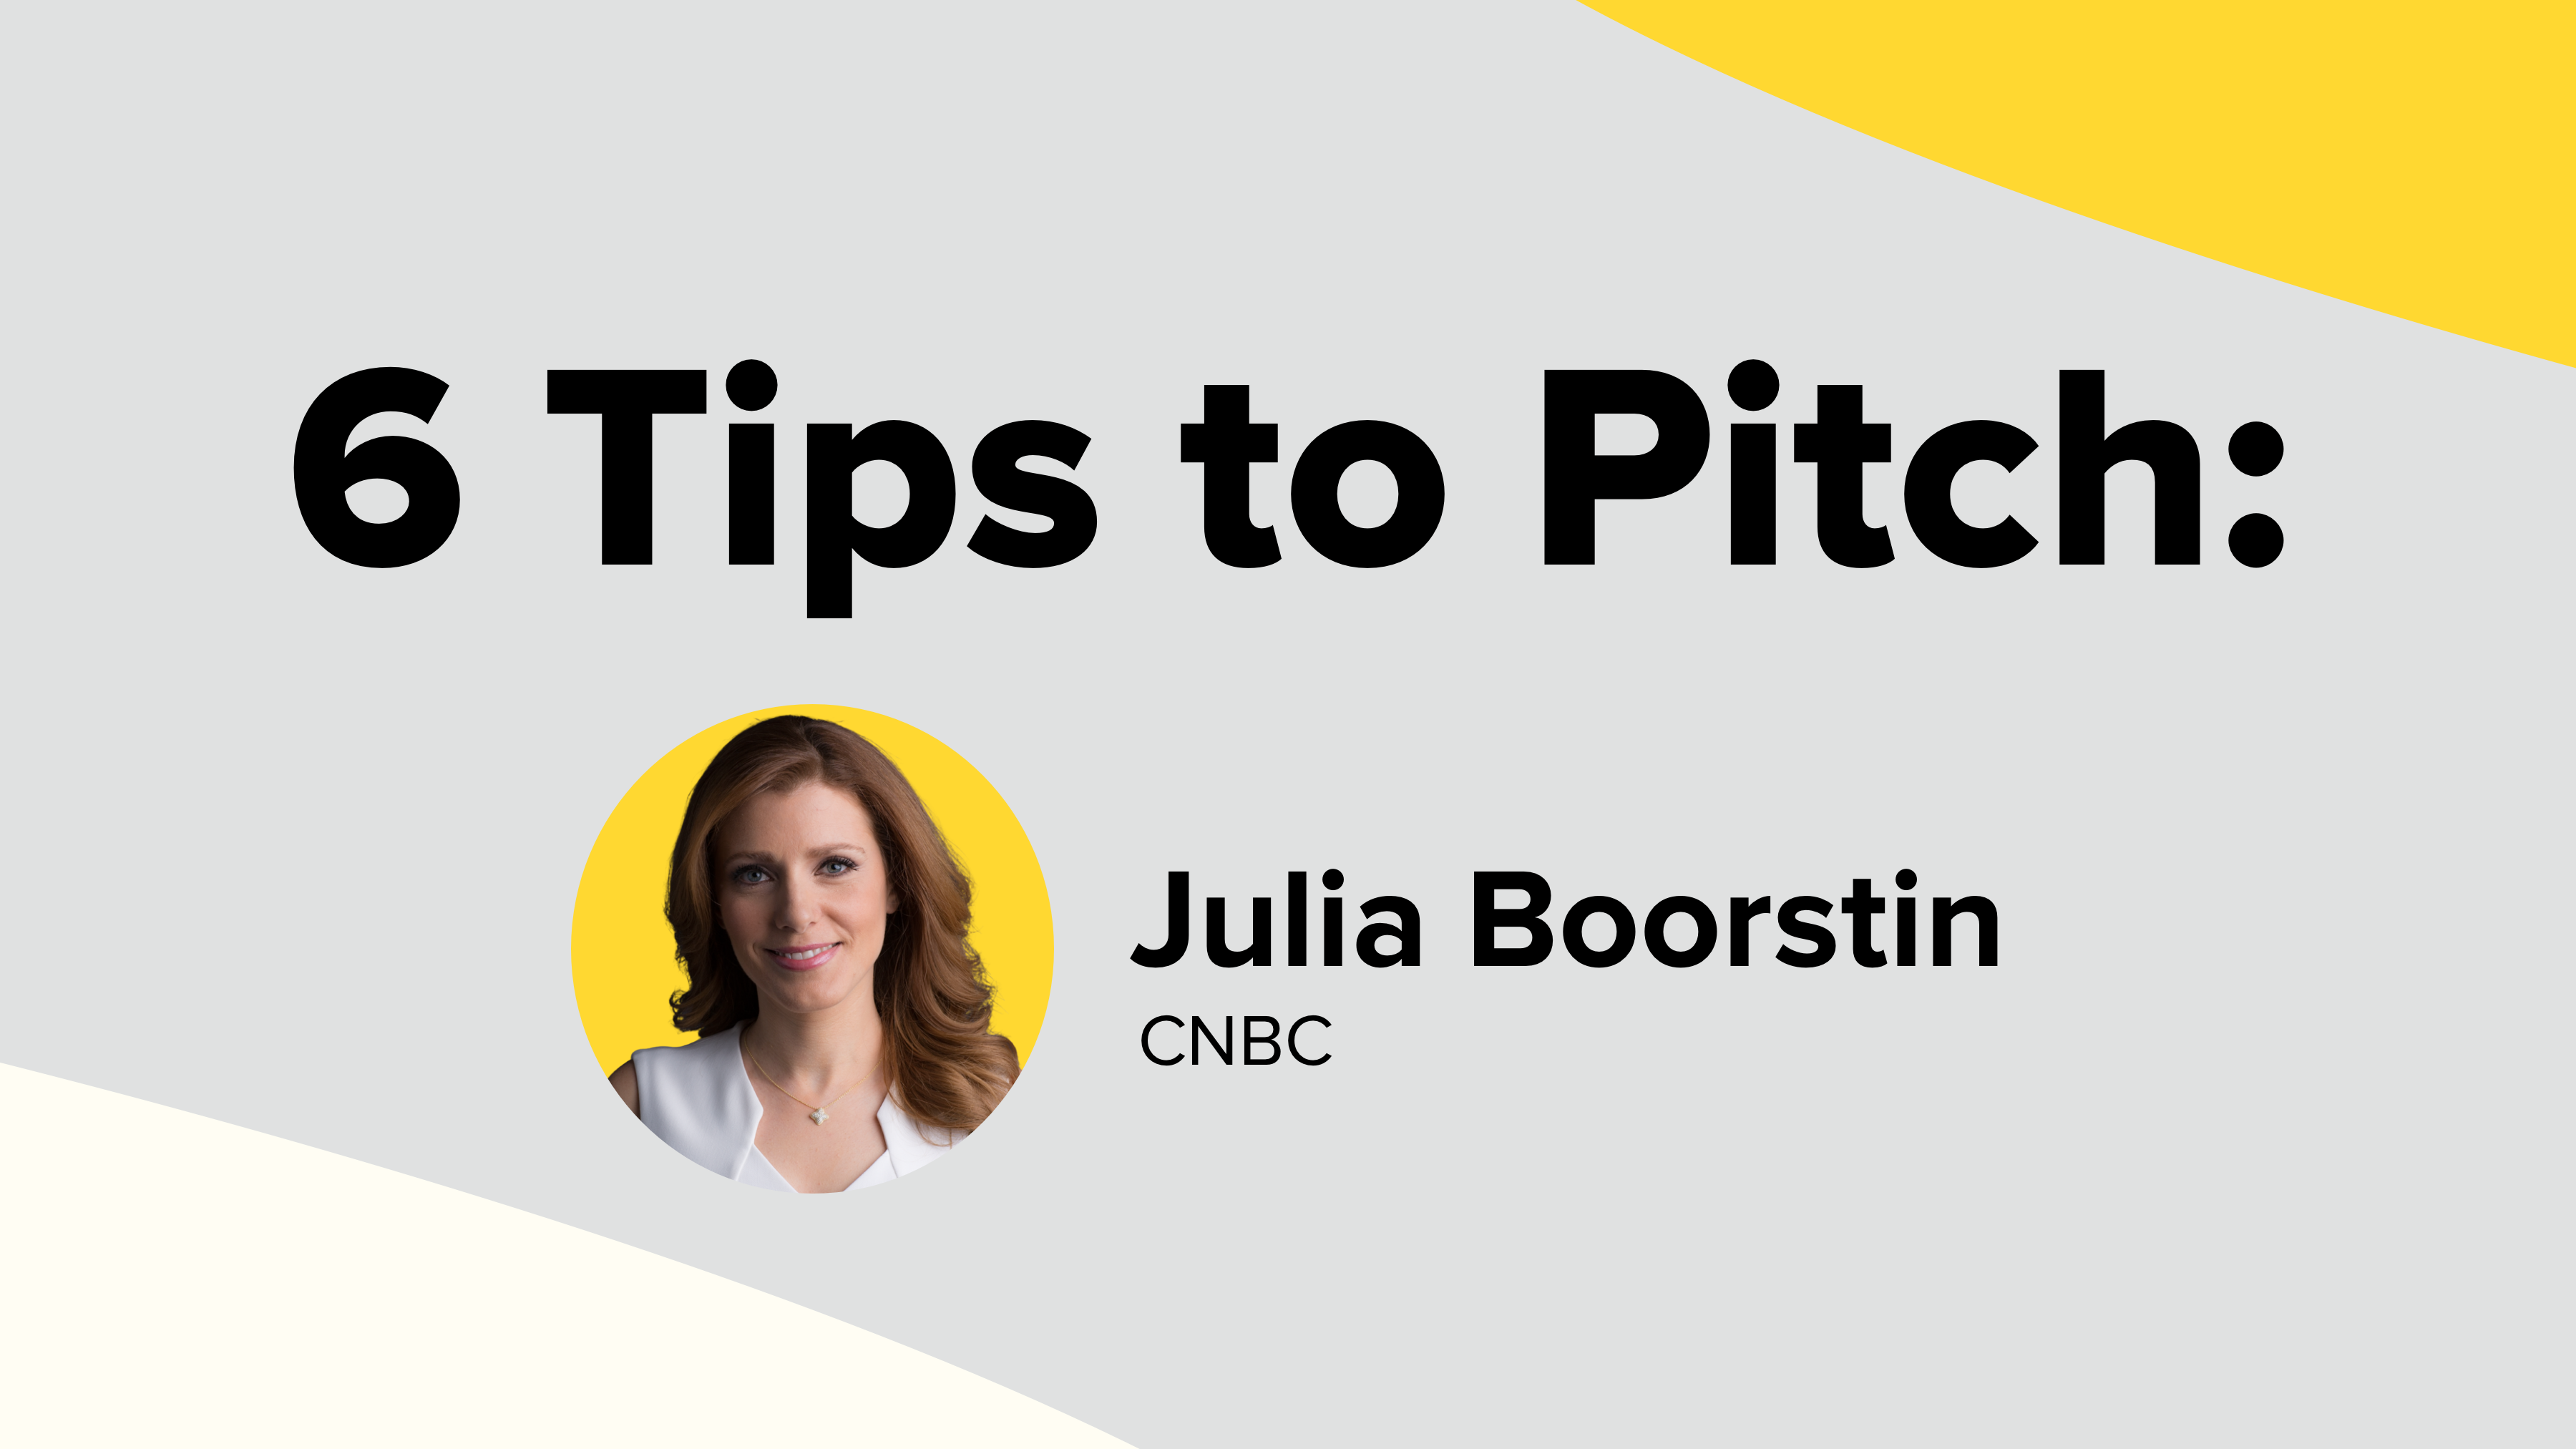 6 Tips to Pitch Julia Boorstin of CNBC